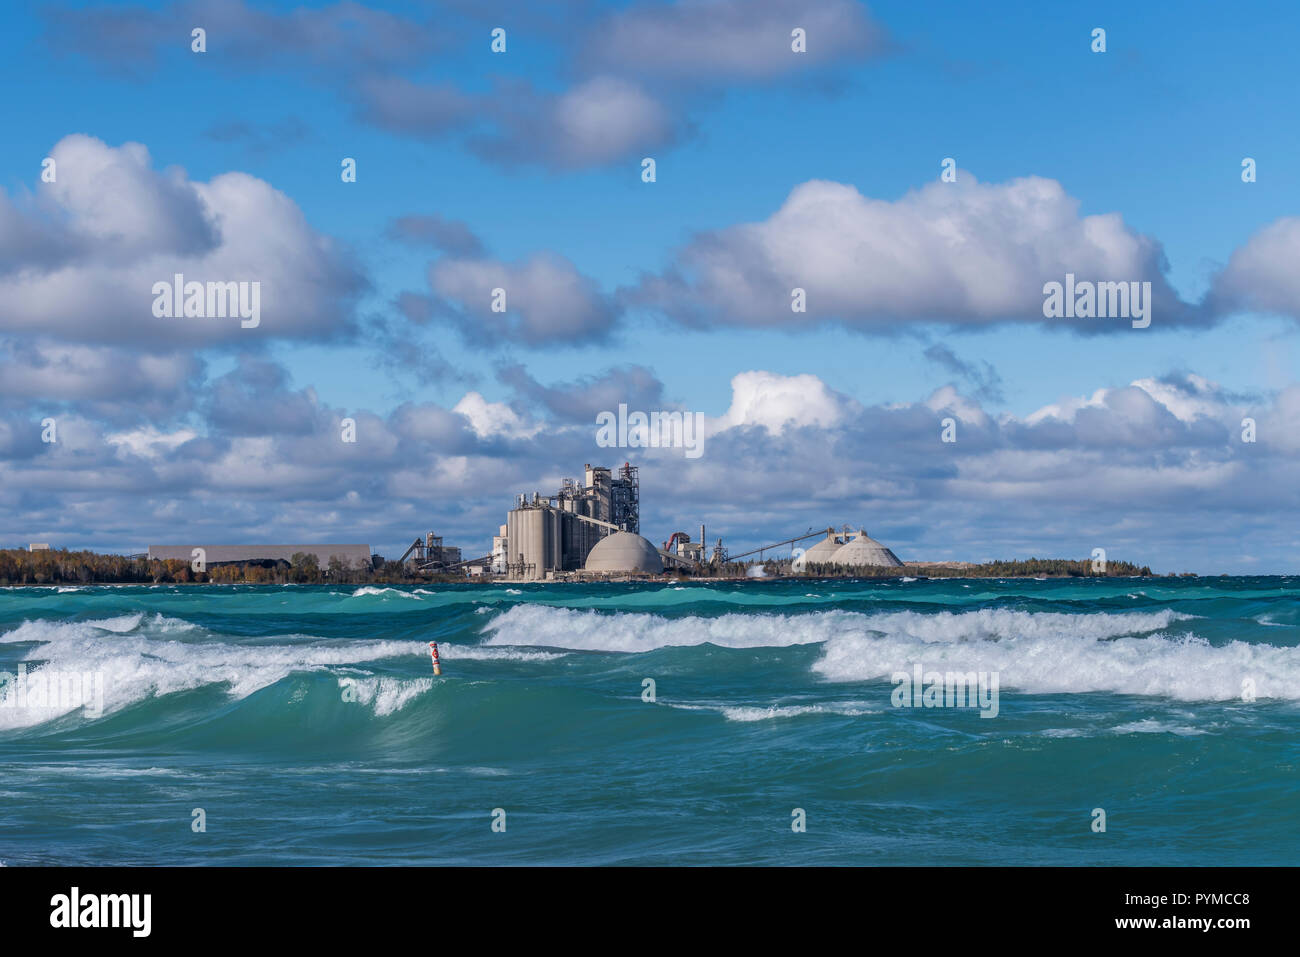 An industrial plant (Cement Plant) on the shore of a lake, from across the water with breaking waves in the foreground. Stock Photo